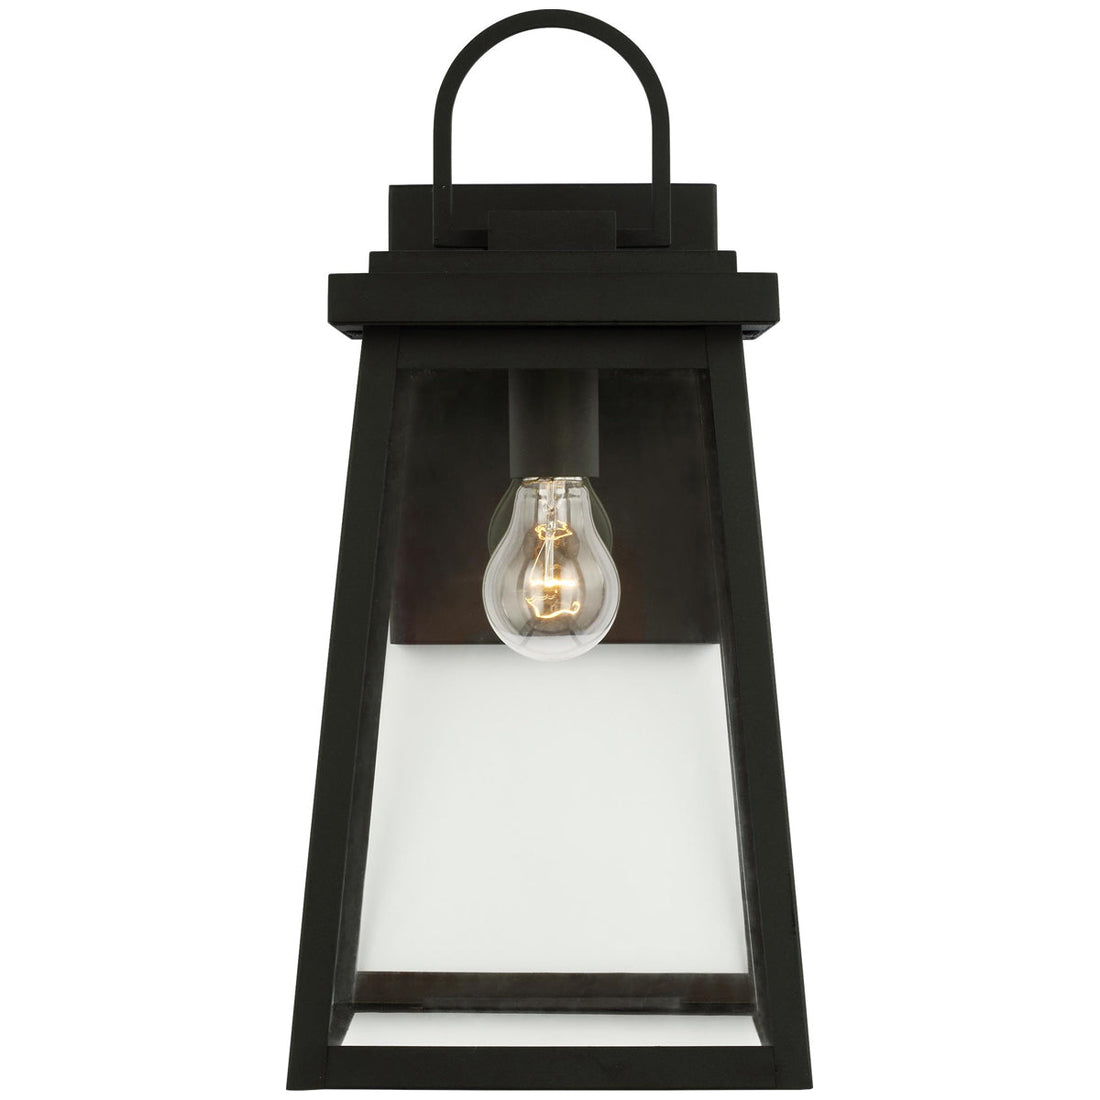 Sea Gull Lighting Founders Large 1-Light Wall Lantern without Bulb